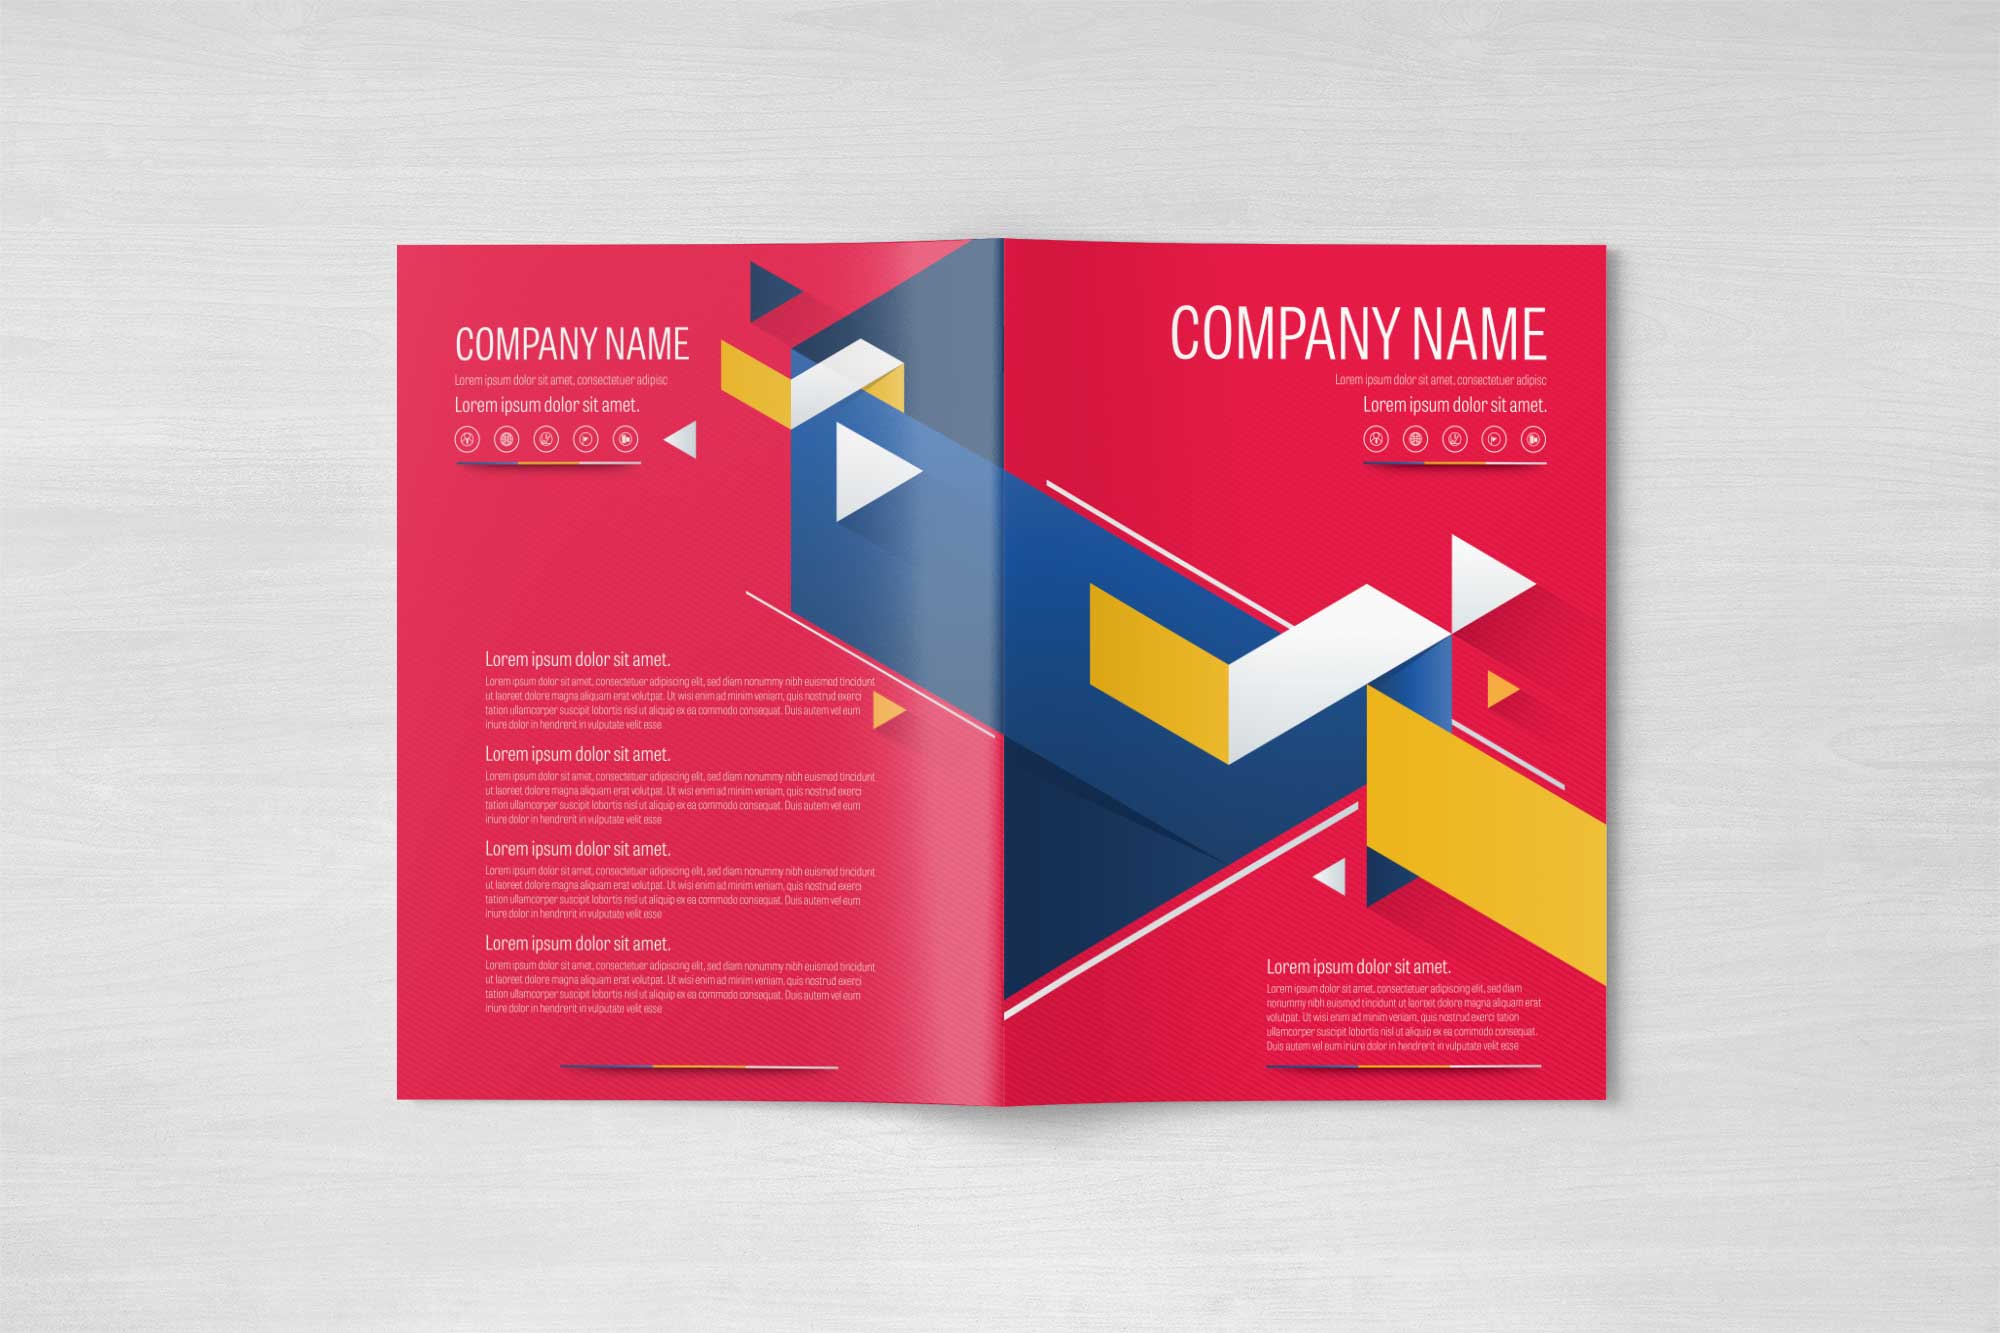 a4-red-business-brochure